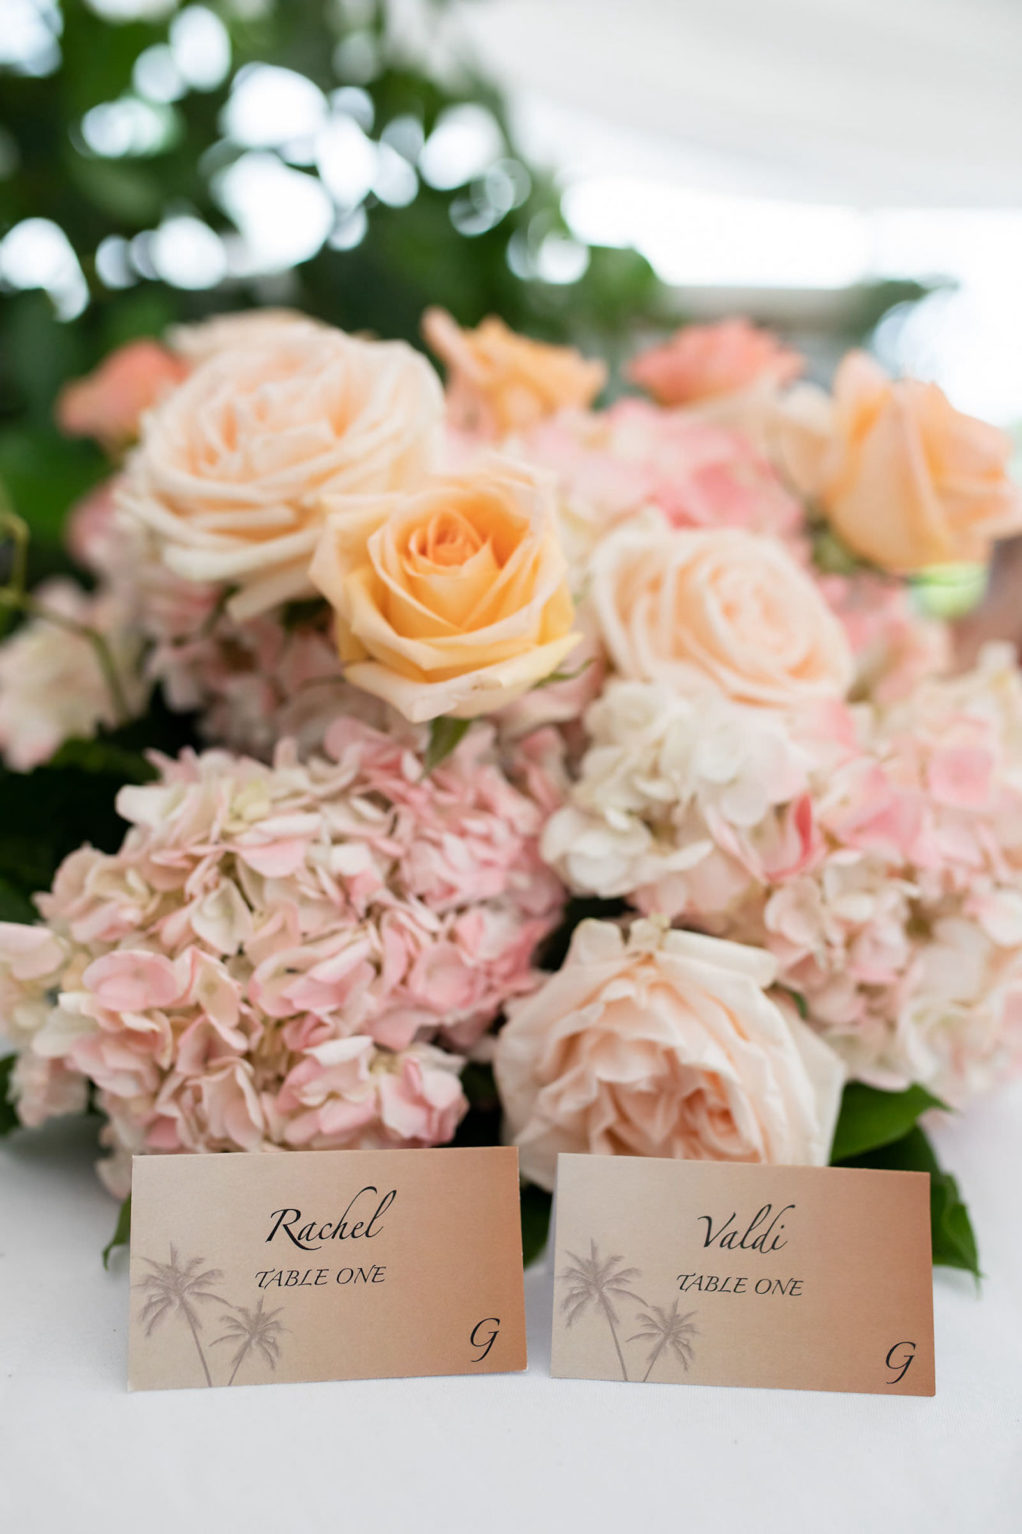 Bride and Groom Beach Wedding Escort Place Cards with Palm Tree Motif Design | Peach Roses with Pink Hydrangea